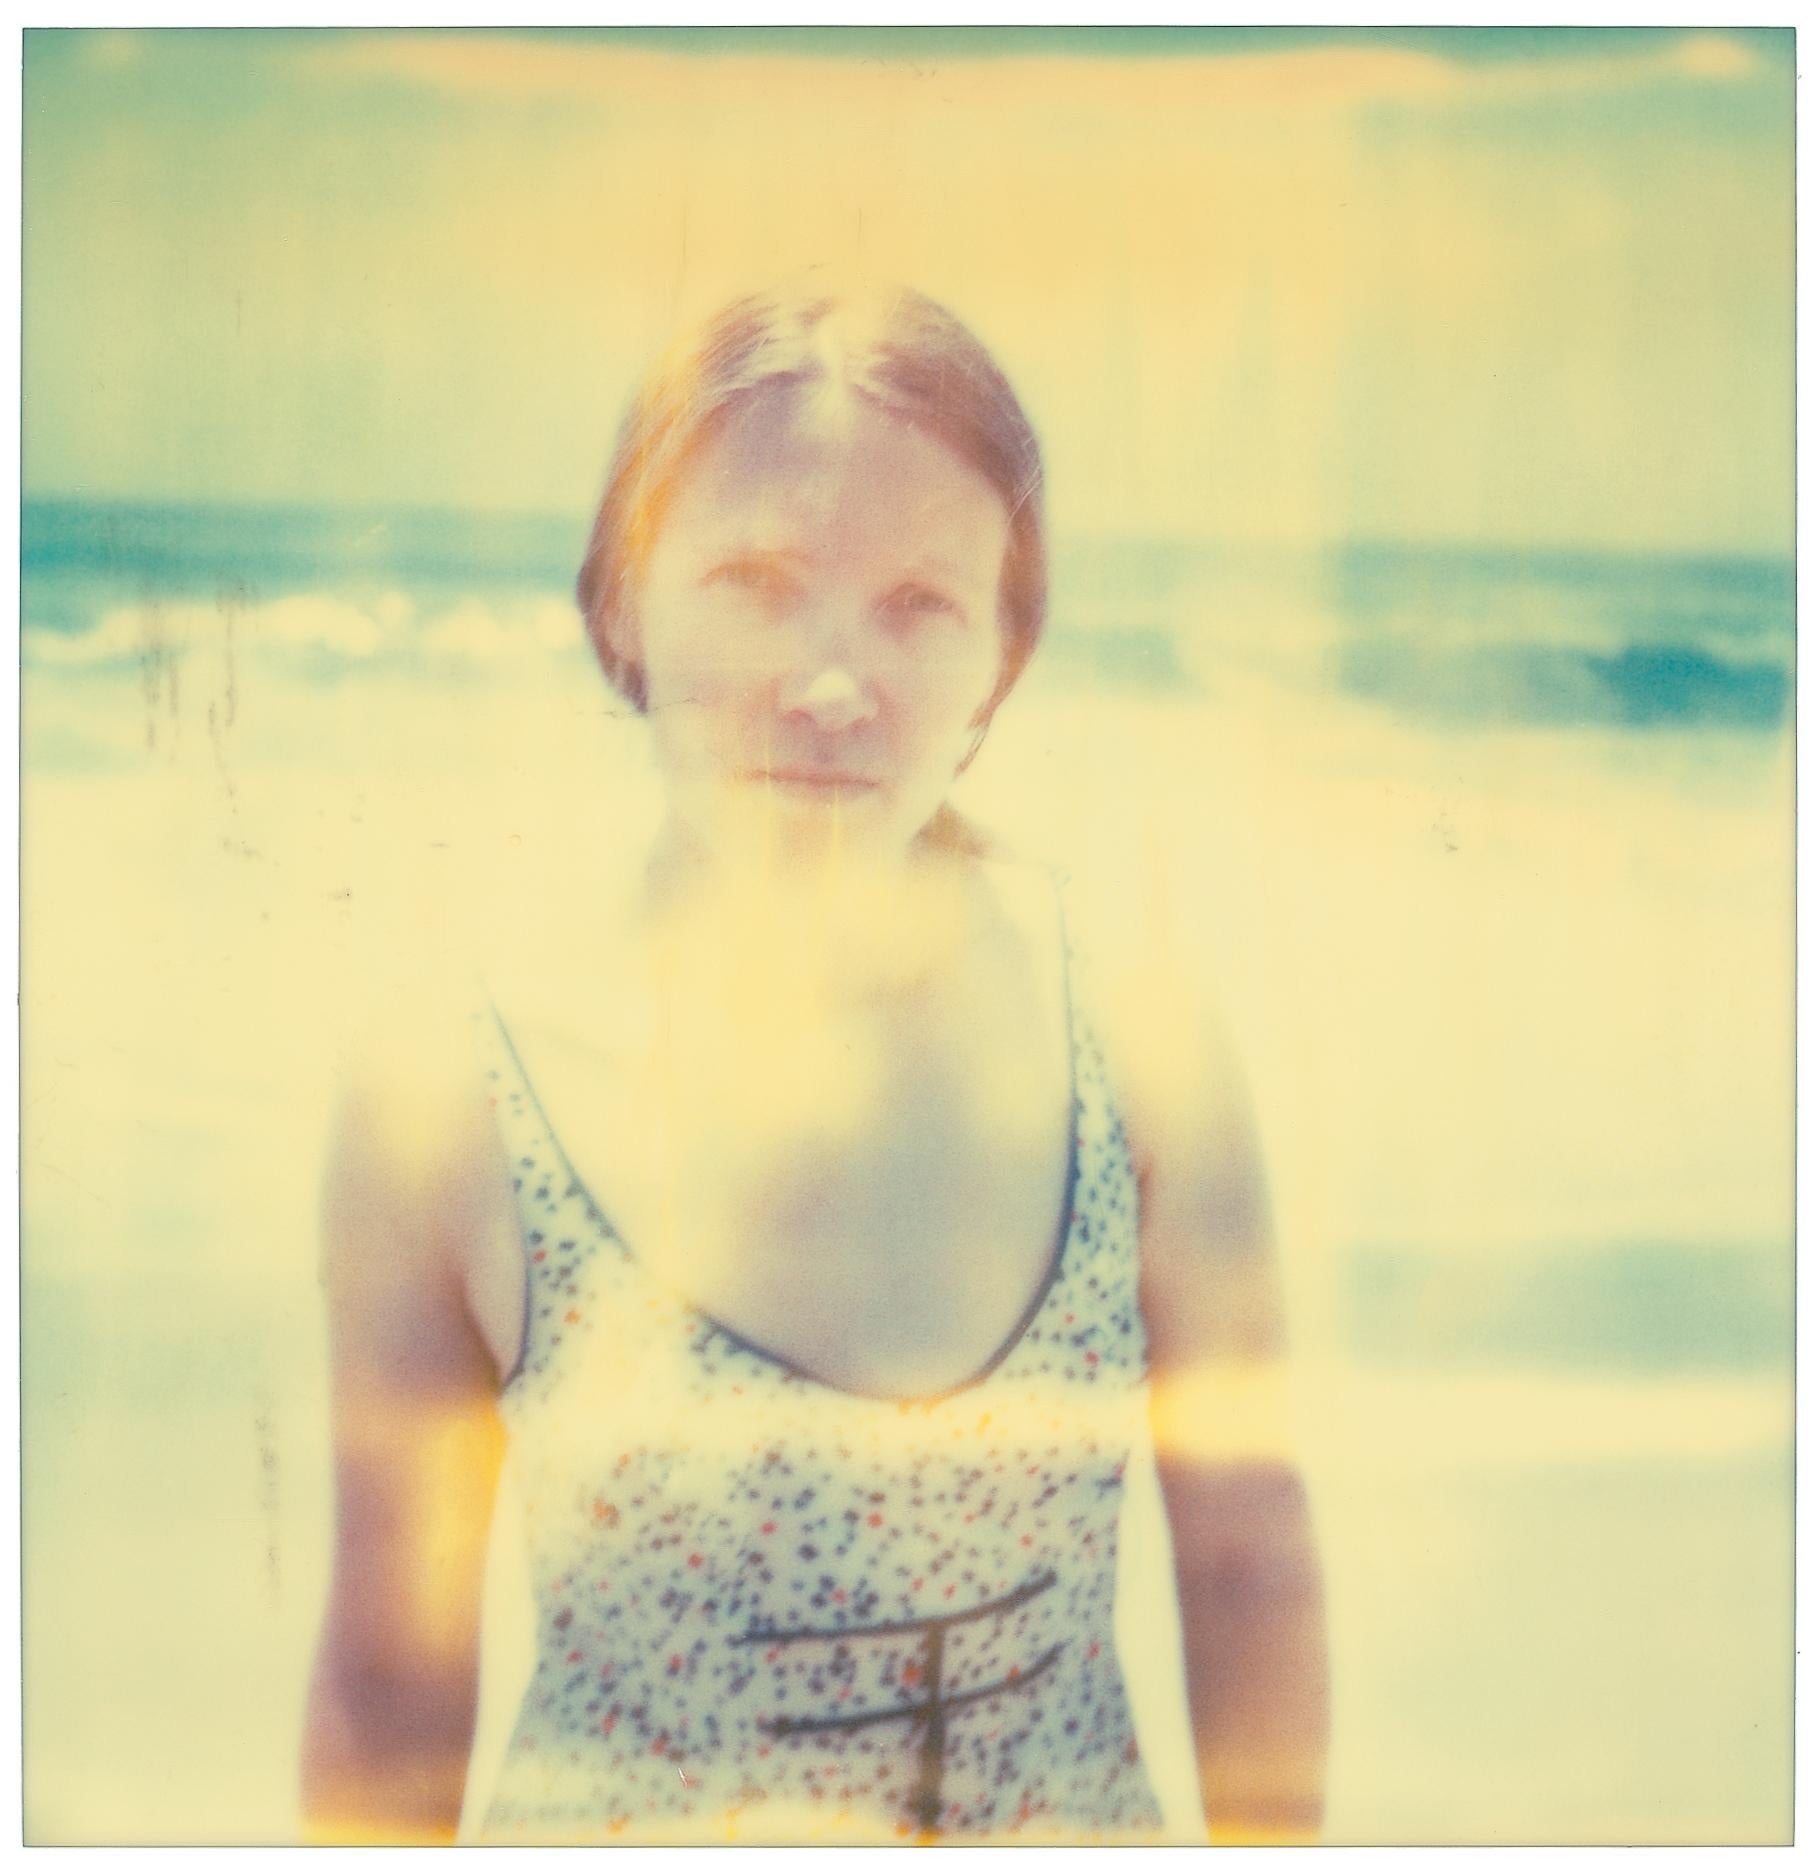 Woman in Malibu (Stranger than Paradise), triptych - 1999, 

58x56cm each, installed with gaps 58x180cm, 
Edition 4/10
Analog C-Prints, hand-printed by the artist and based on 3 Polaroids. 
Certificate and Signature label, 
artist Inventory No.